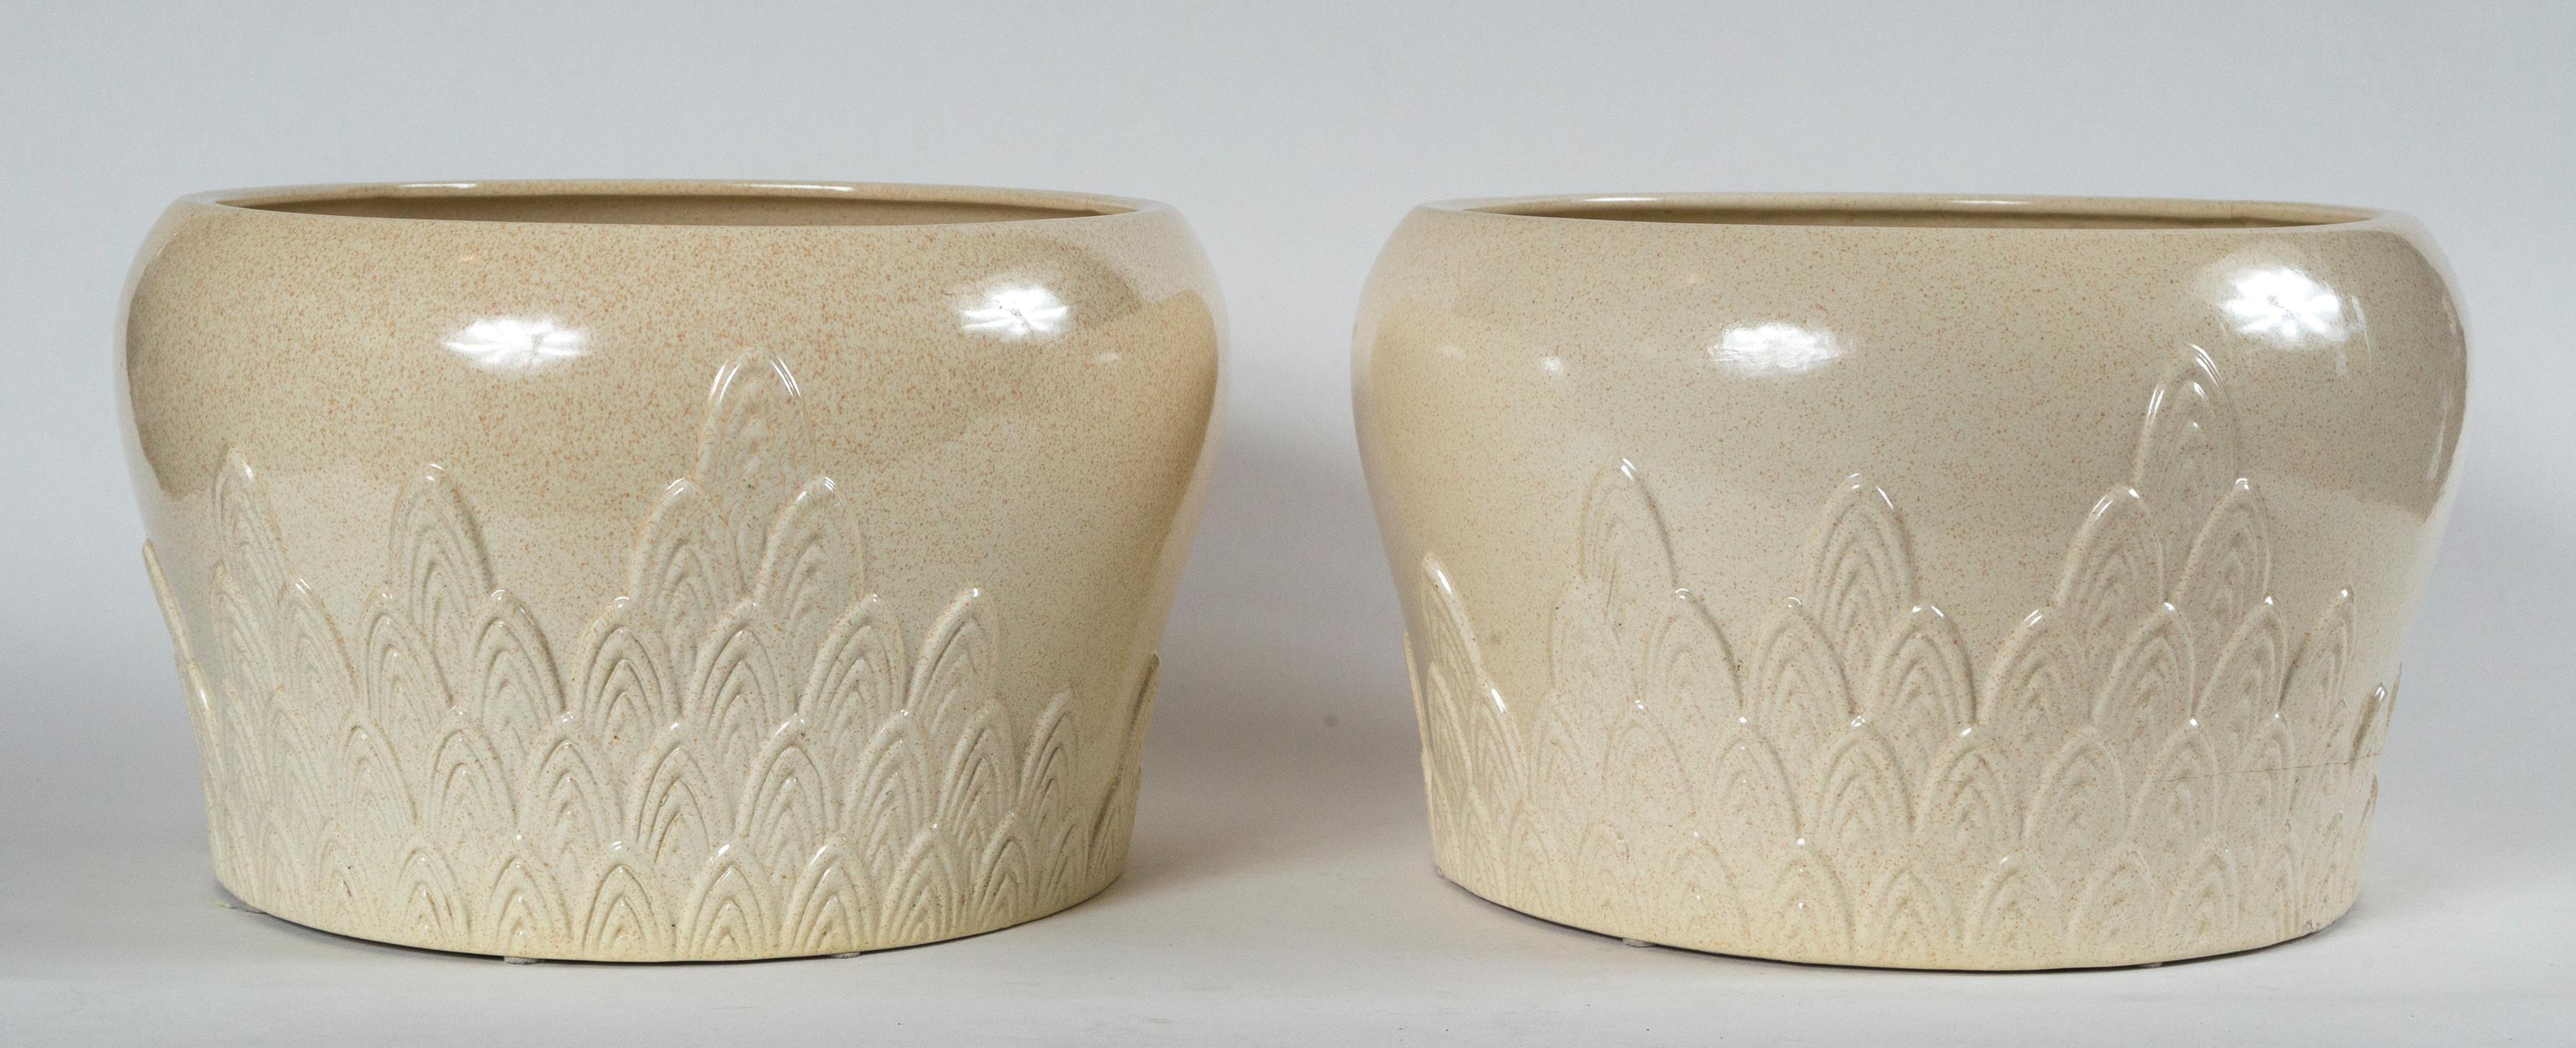 Pair of ceramic planters, Tommaso Barbi, Italy, mid-20th century. A striking pair of planters with raised, arched design and stippled glaze. Signed Tommaso Barbi, Ceramiche, Italy. A post war Italian artist, Barbi worked with a variety of materials